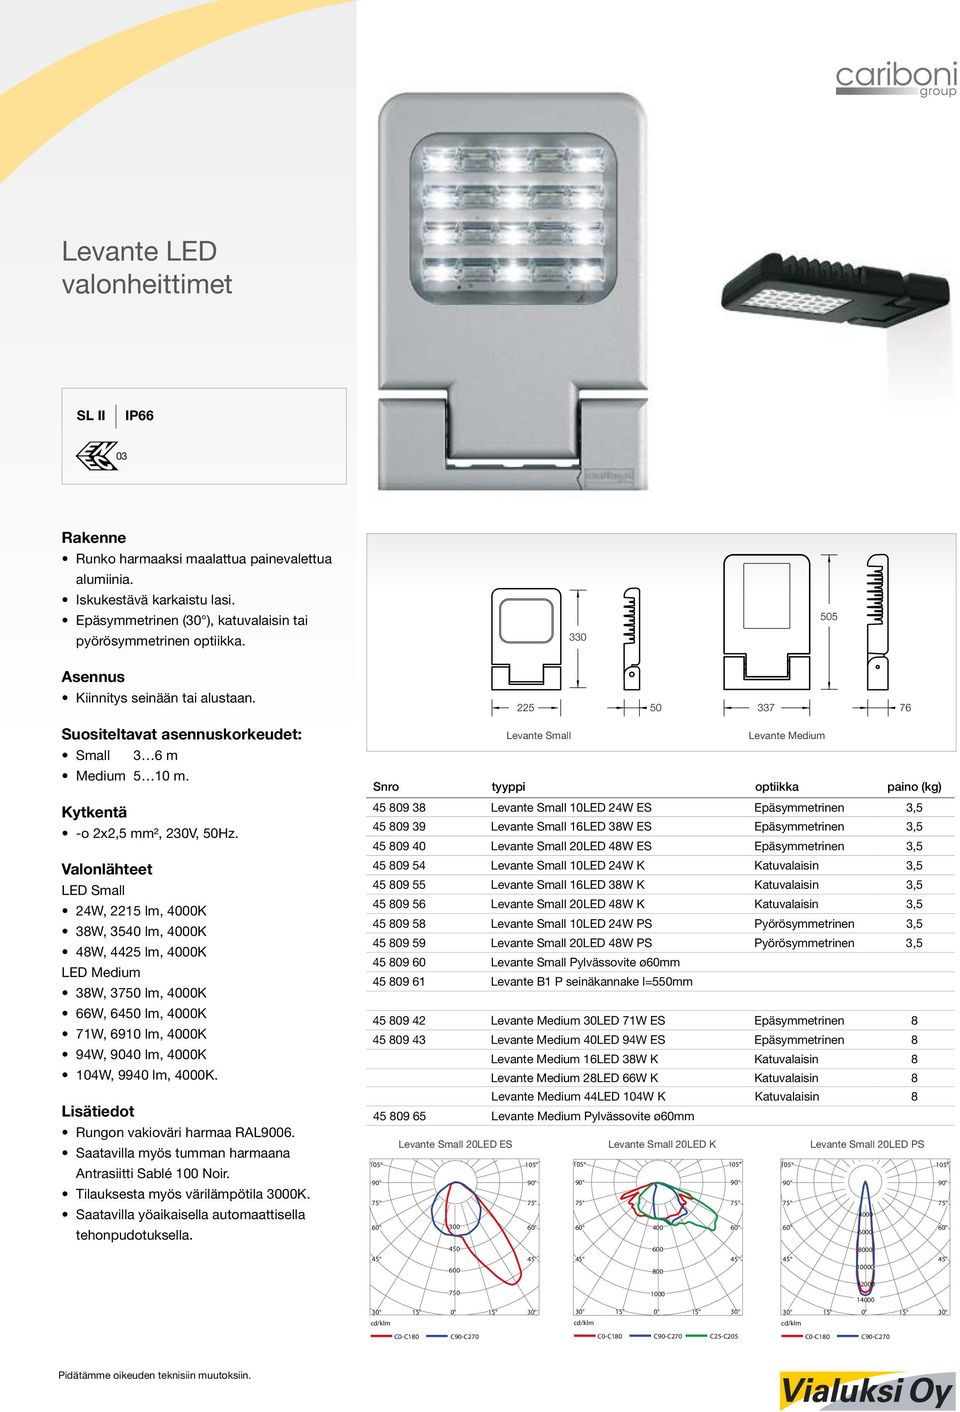 LED Small 24W, 2215 lm, 0K 38W, 3540 lm, 0K 48W, 4425 lm, 0K LED Medium 38W, 3750 lm, 0K 66W, 6450 lm, 0K 71W, 6910 lm, 0K 94W, 9040 lm, 0K 104W, 9940 lm, 0K. Rungon vakioväri harmaa RAL9006.